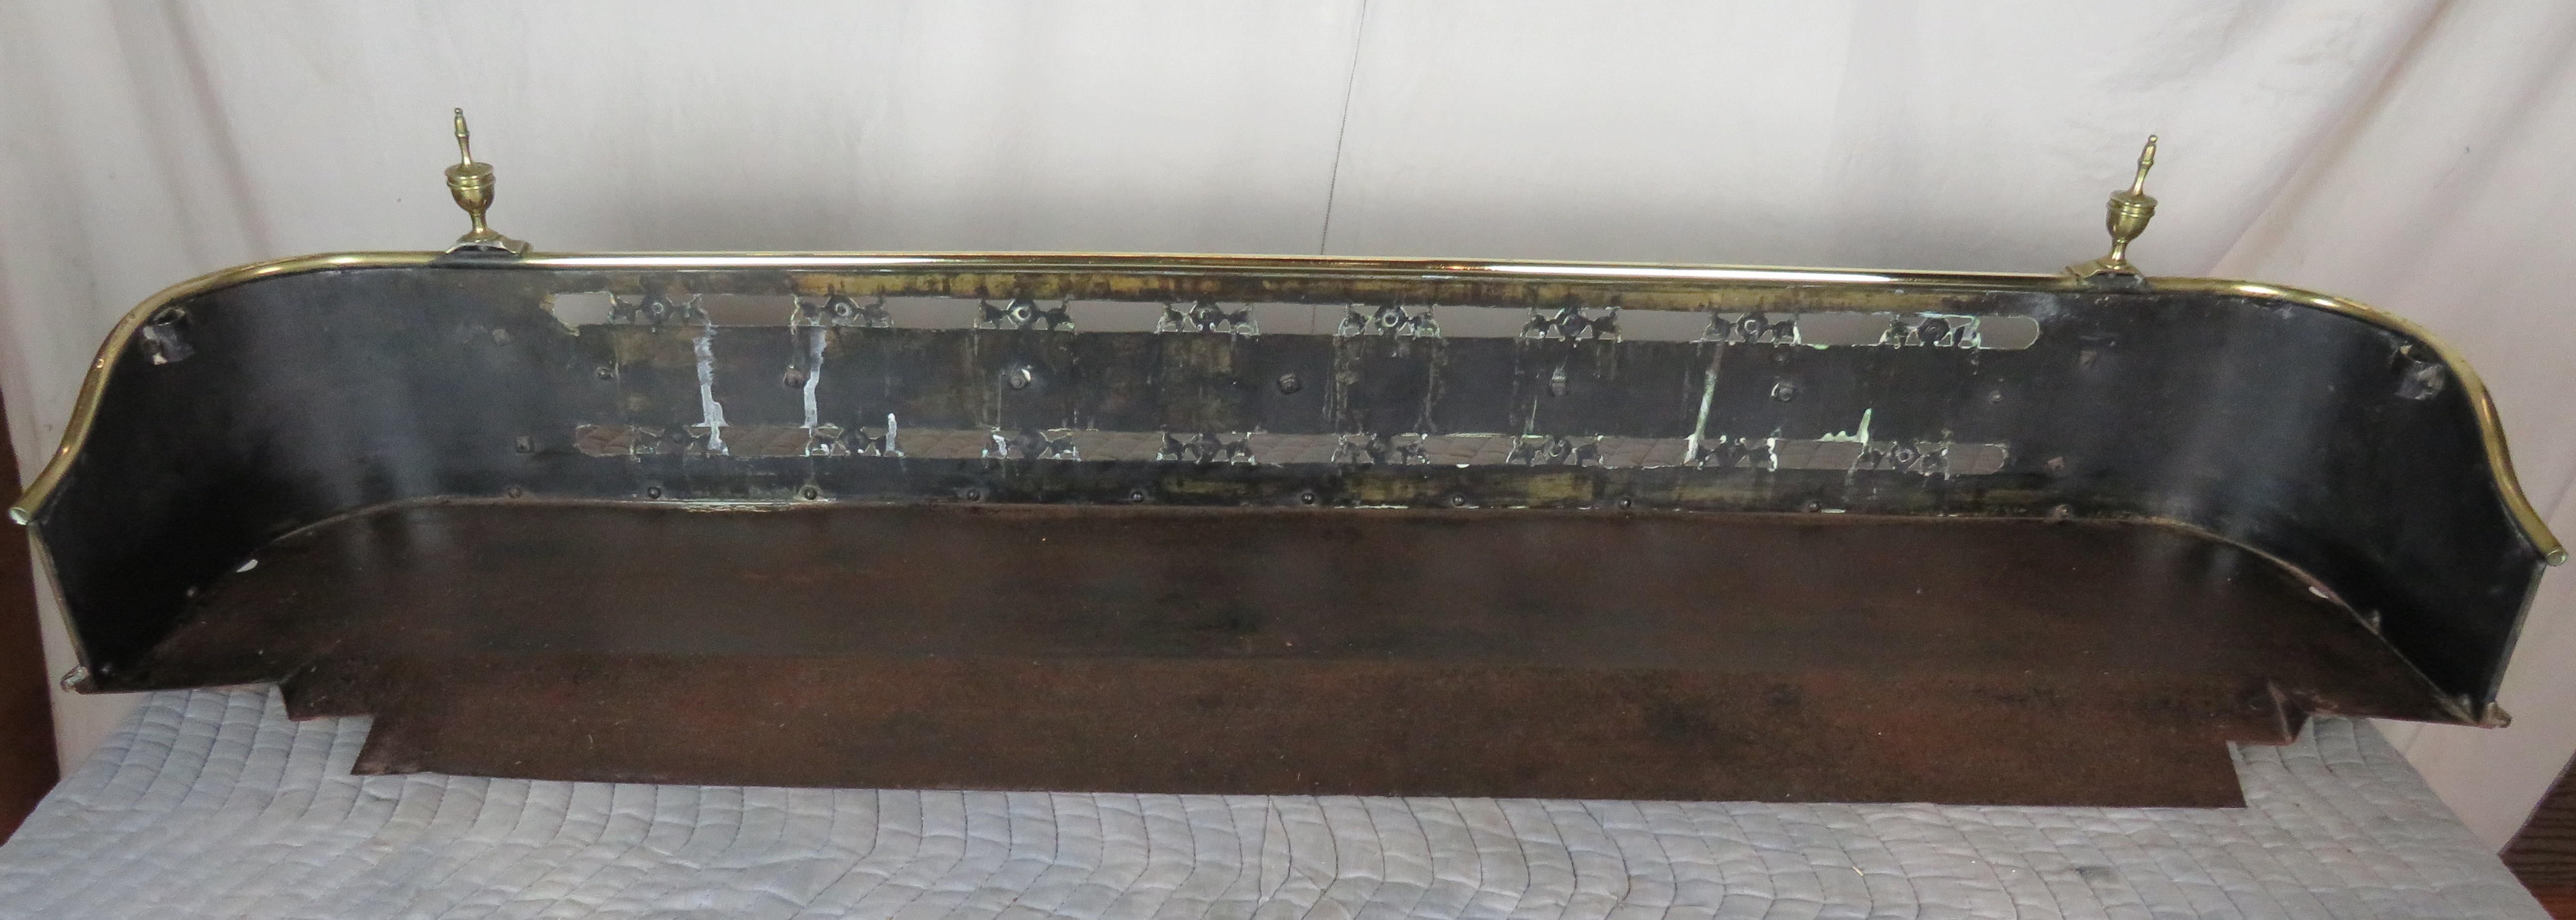 19th Century English Brass Fire Fender with Urn Finials In Good Condition For Sale In Nantucket, MA